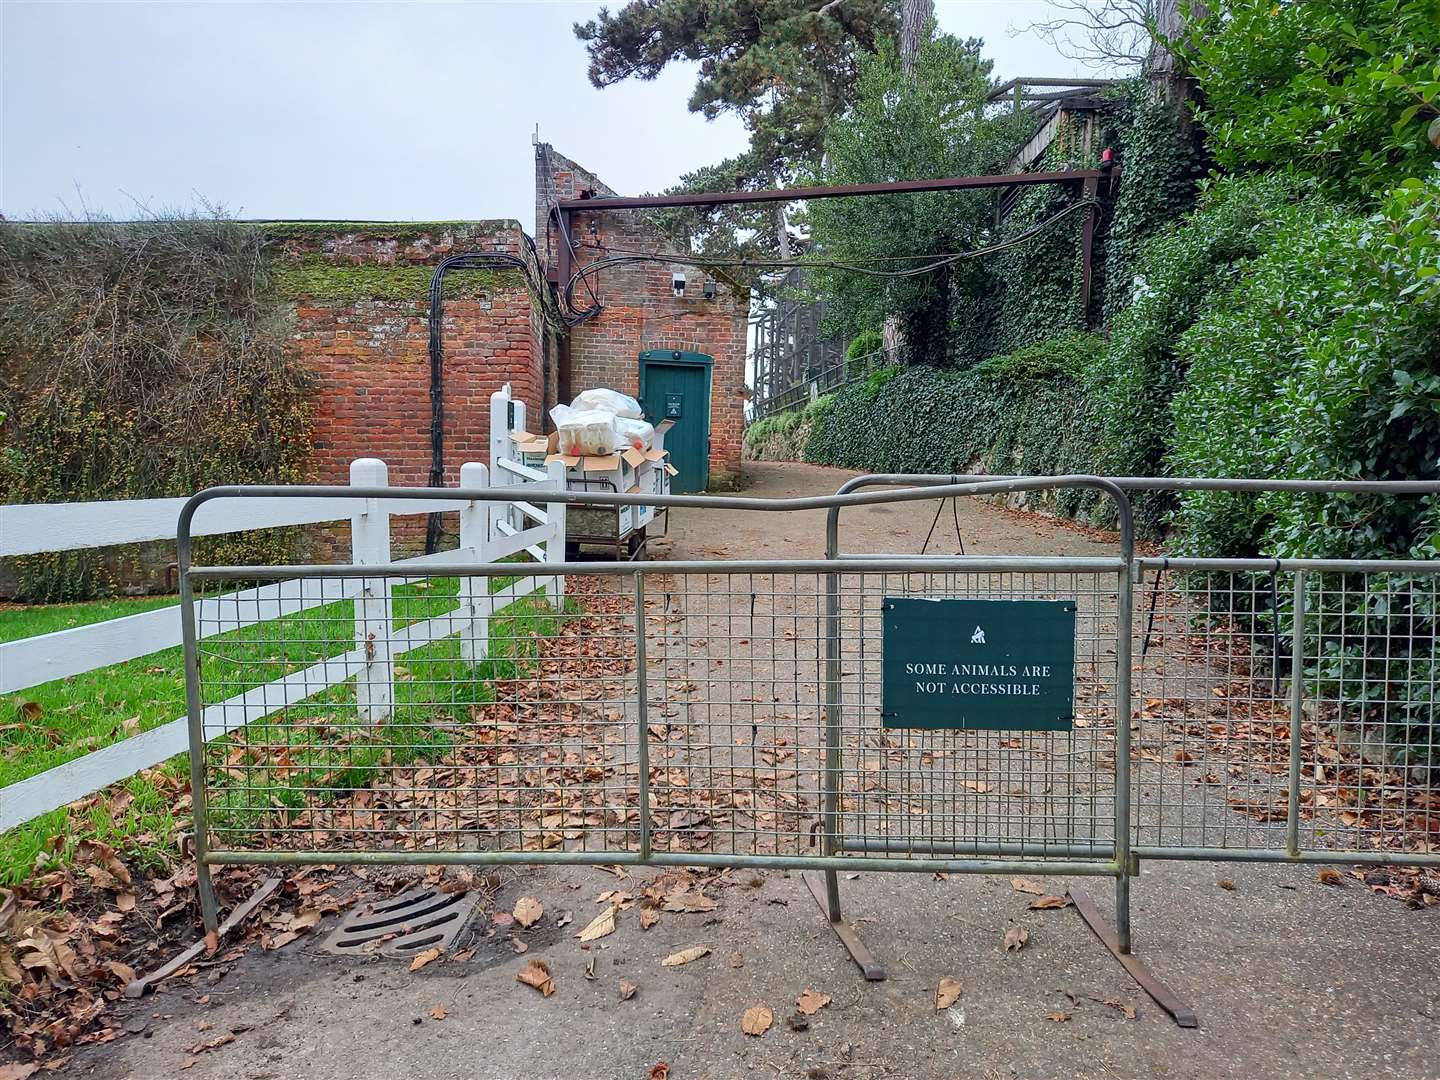 The route down to the old gorilla enclosure has been shut off for more than a year